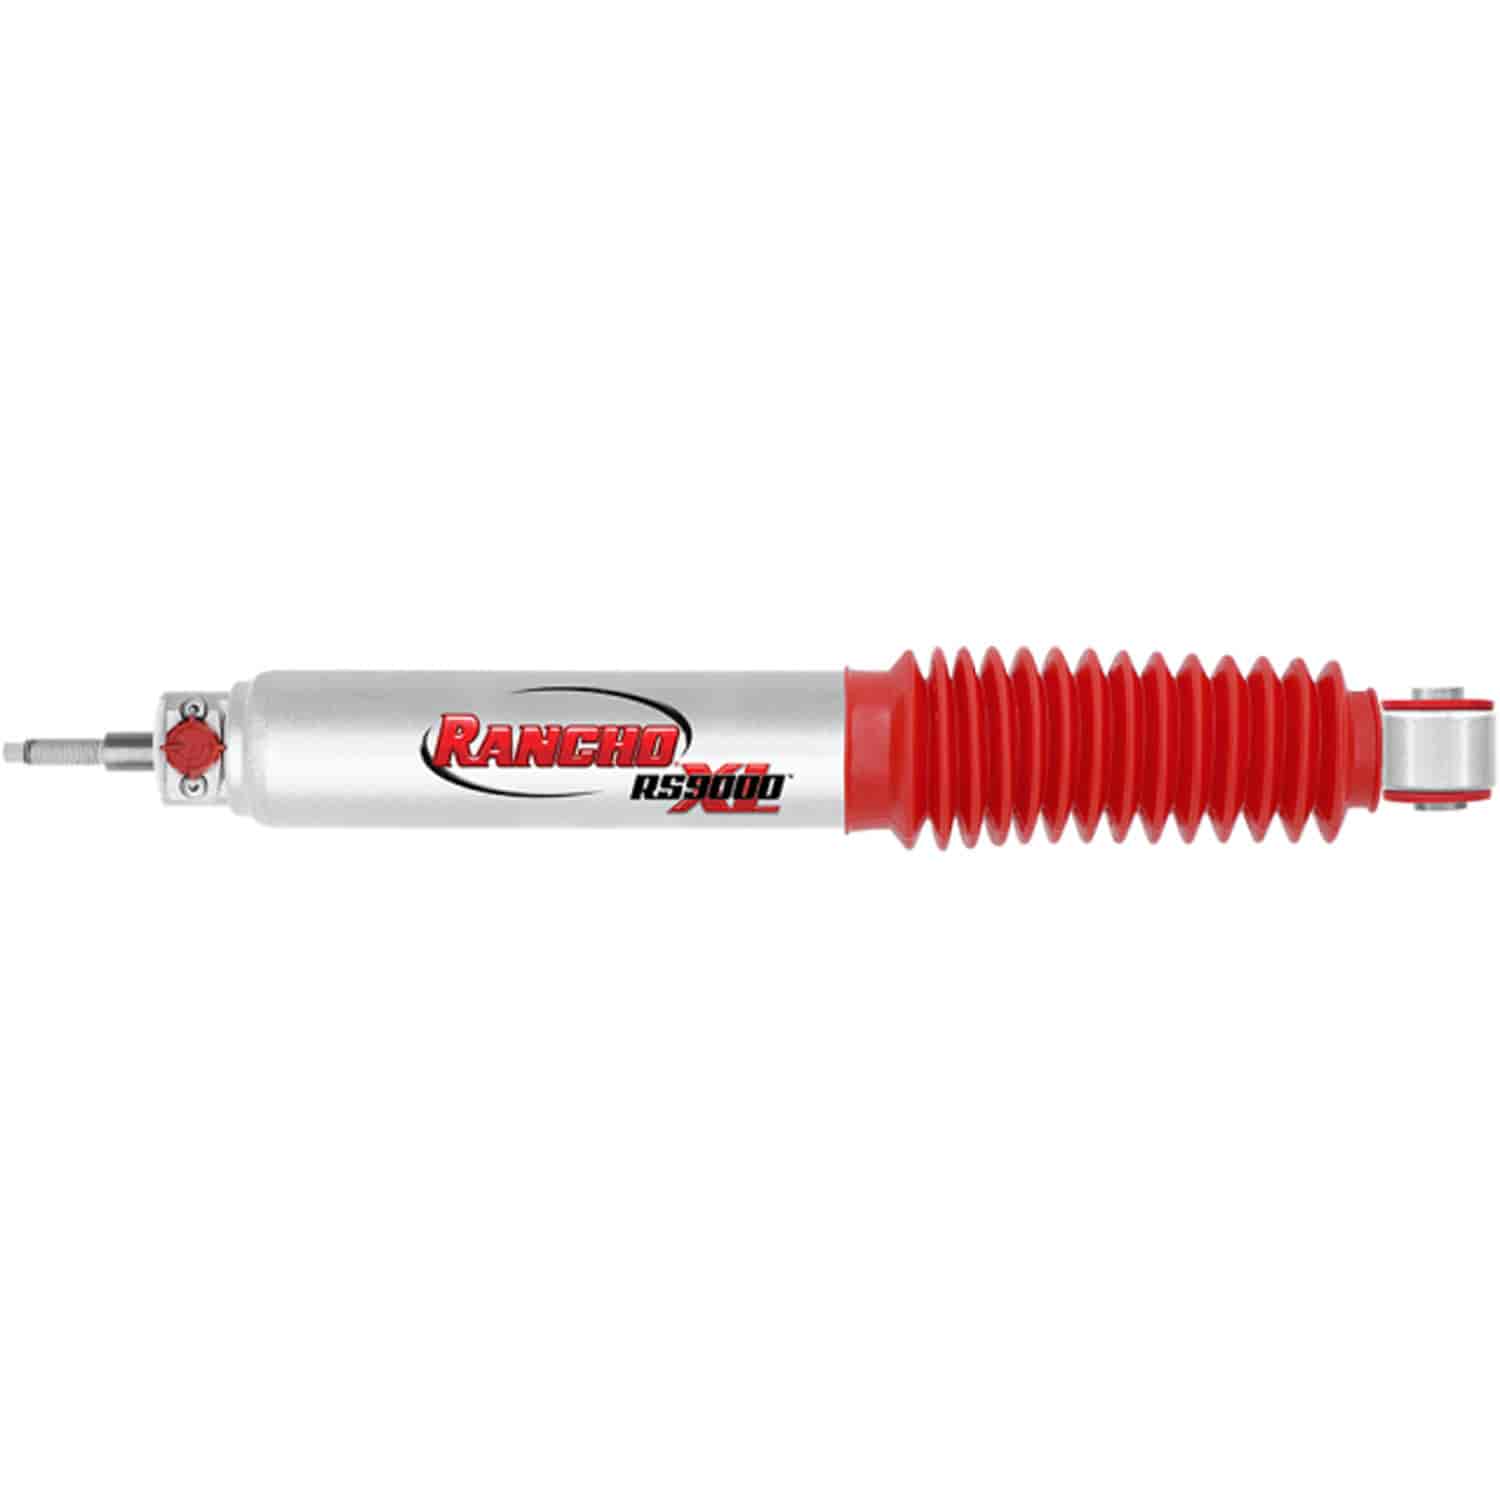 RS9000XL Rear Shock Absorber Fits Land Rover Discovery and Range Rover